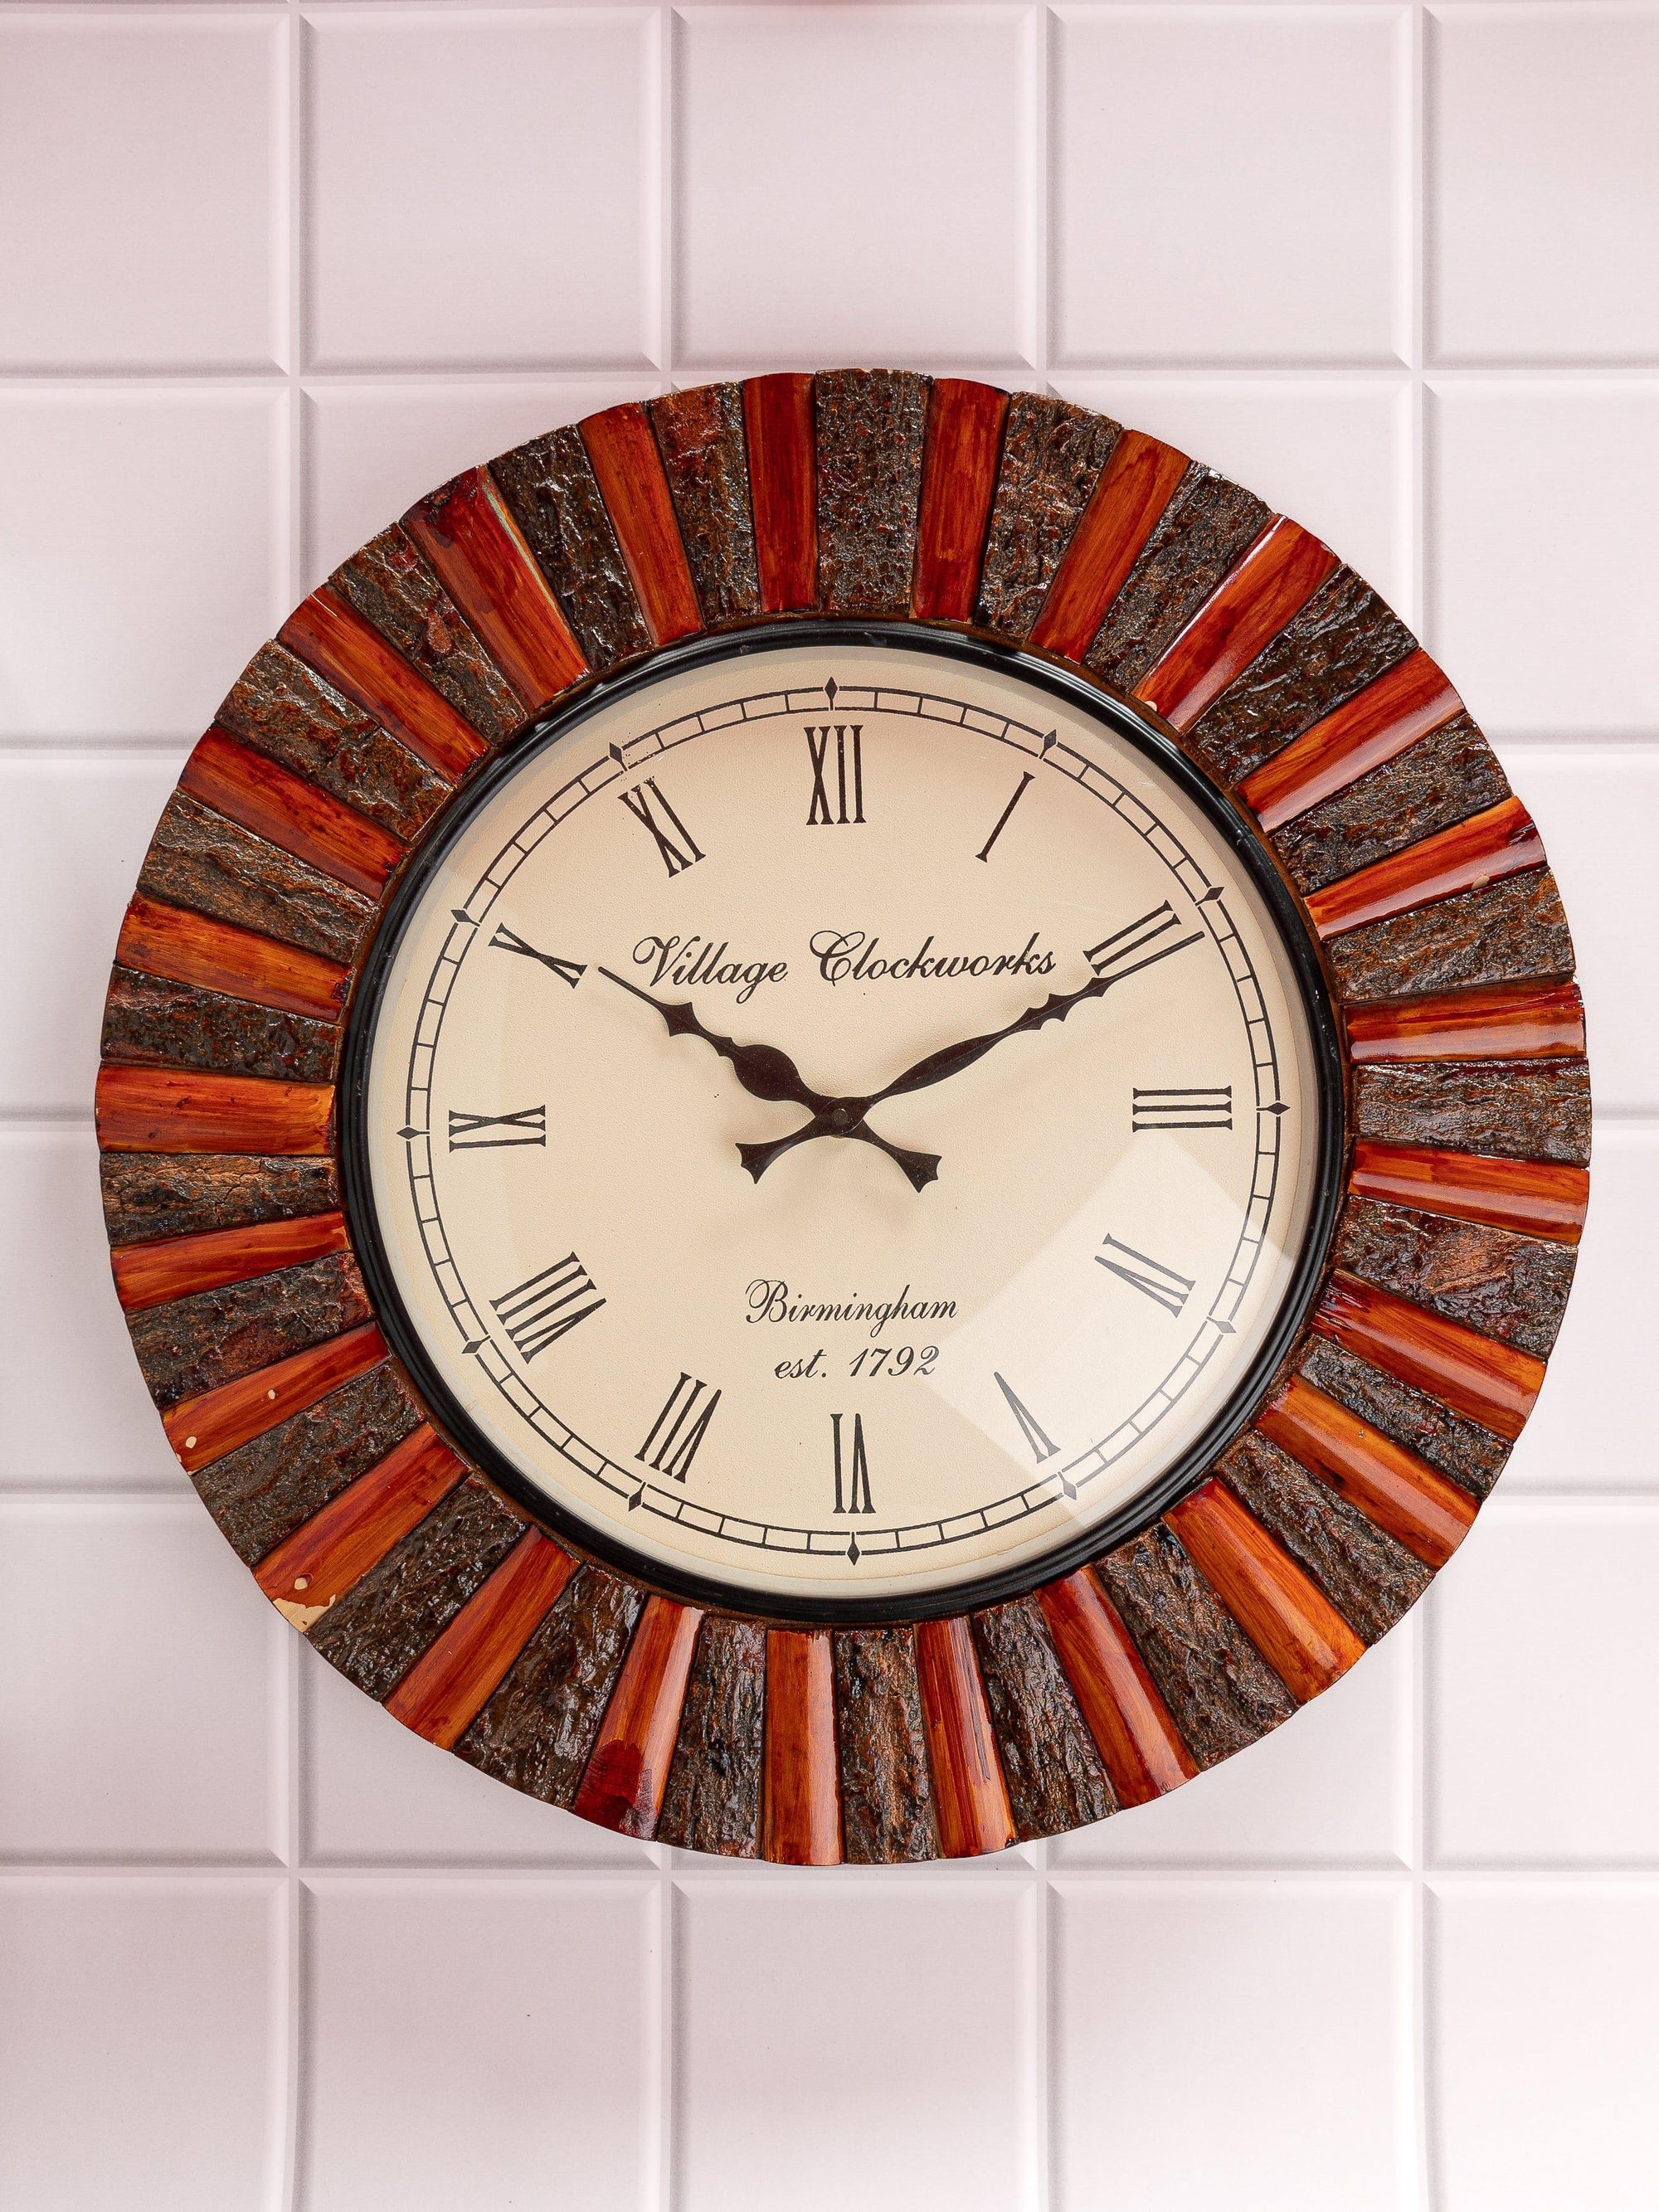 Traditional Red and Black Analogue Wall clock from Jodhpur - 17 inches dia - The Heritage Artifacts